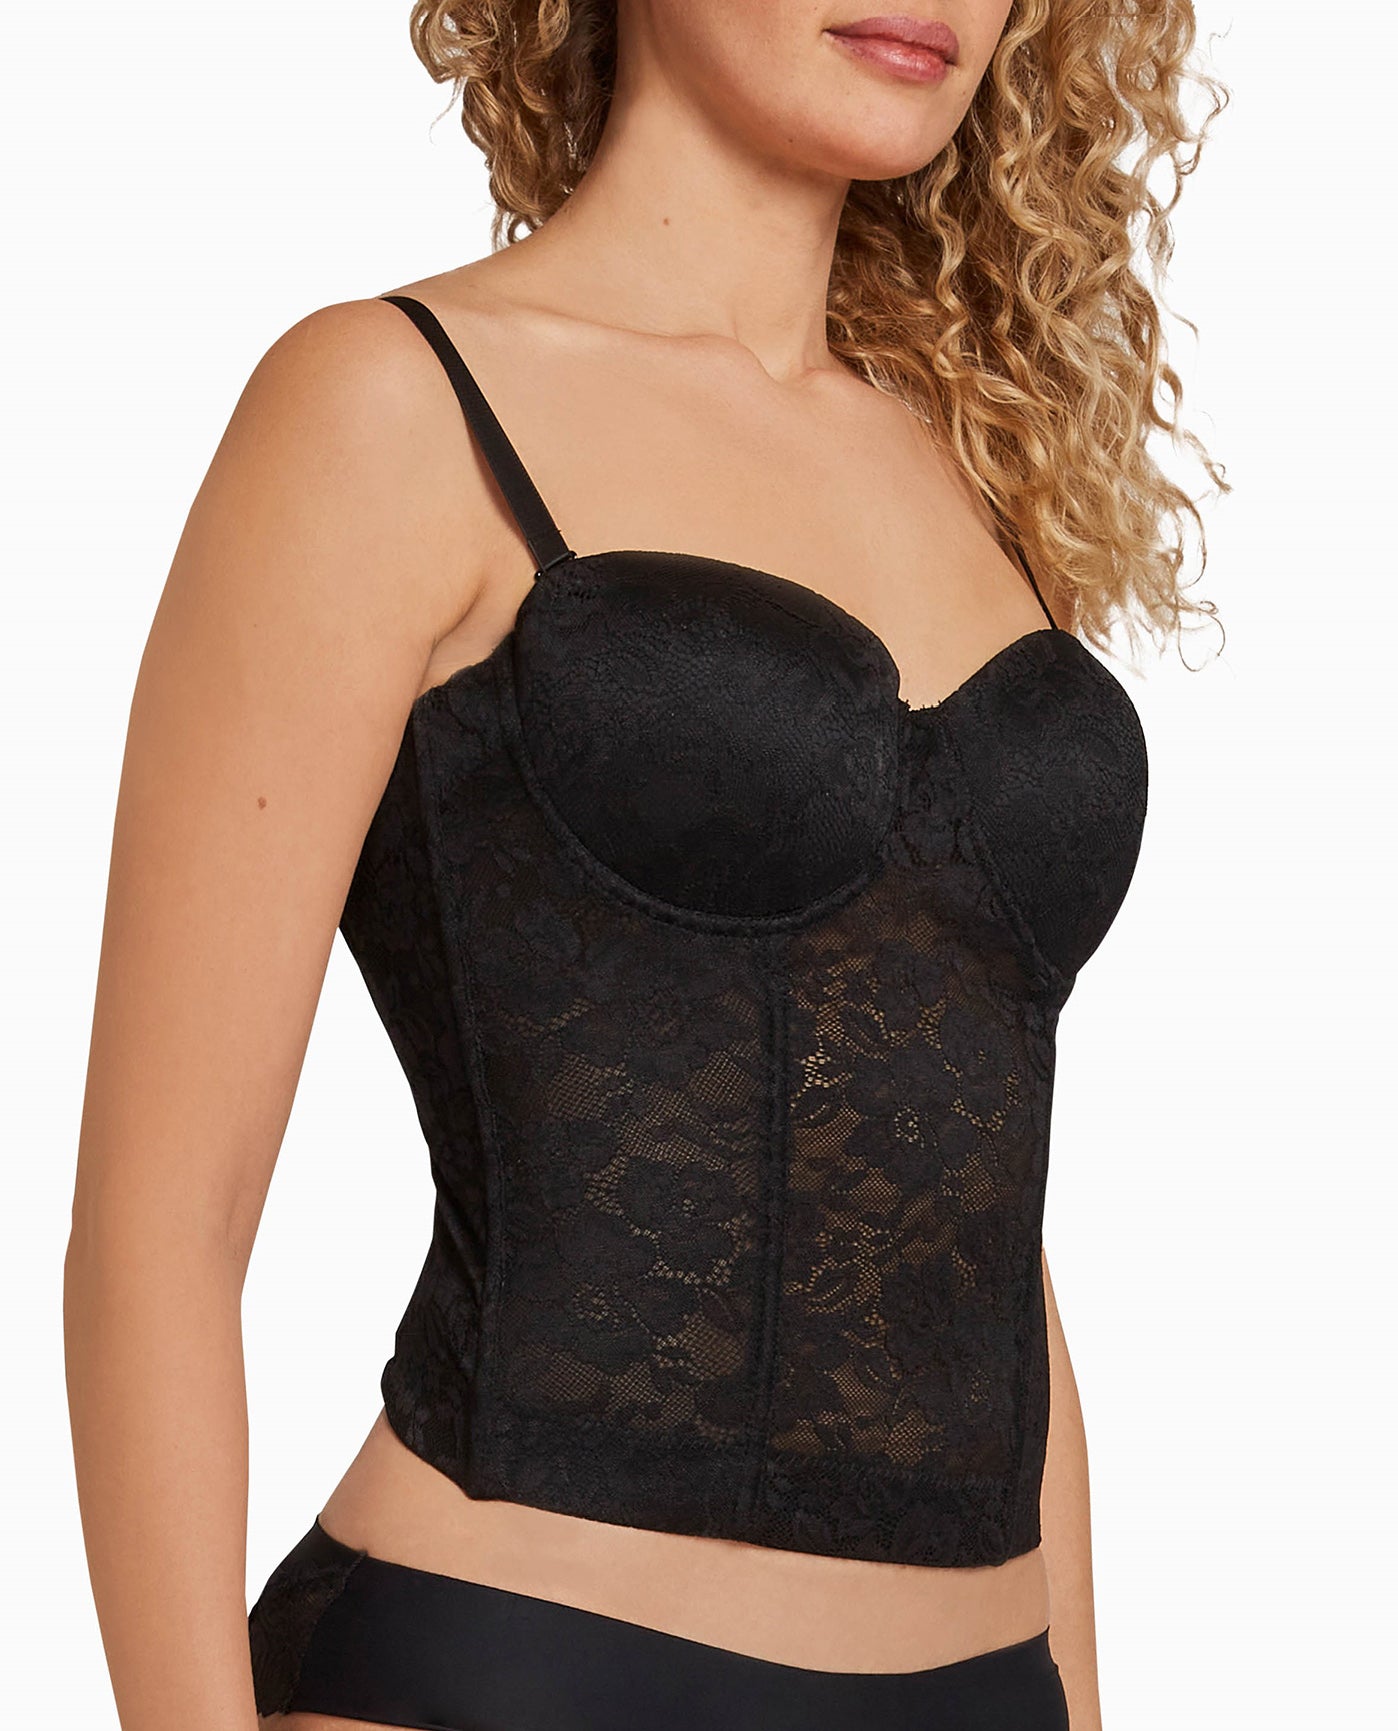 LACE POWER MESH BUSTIER